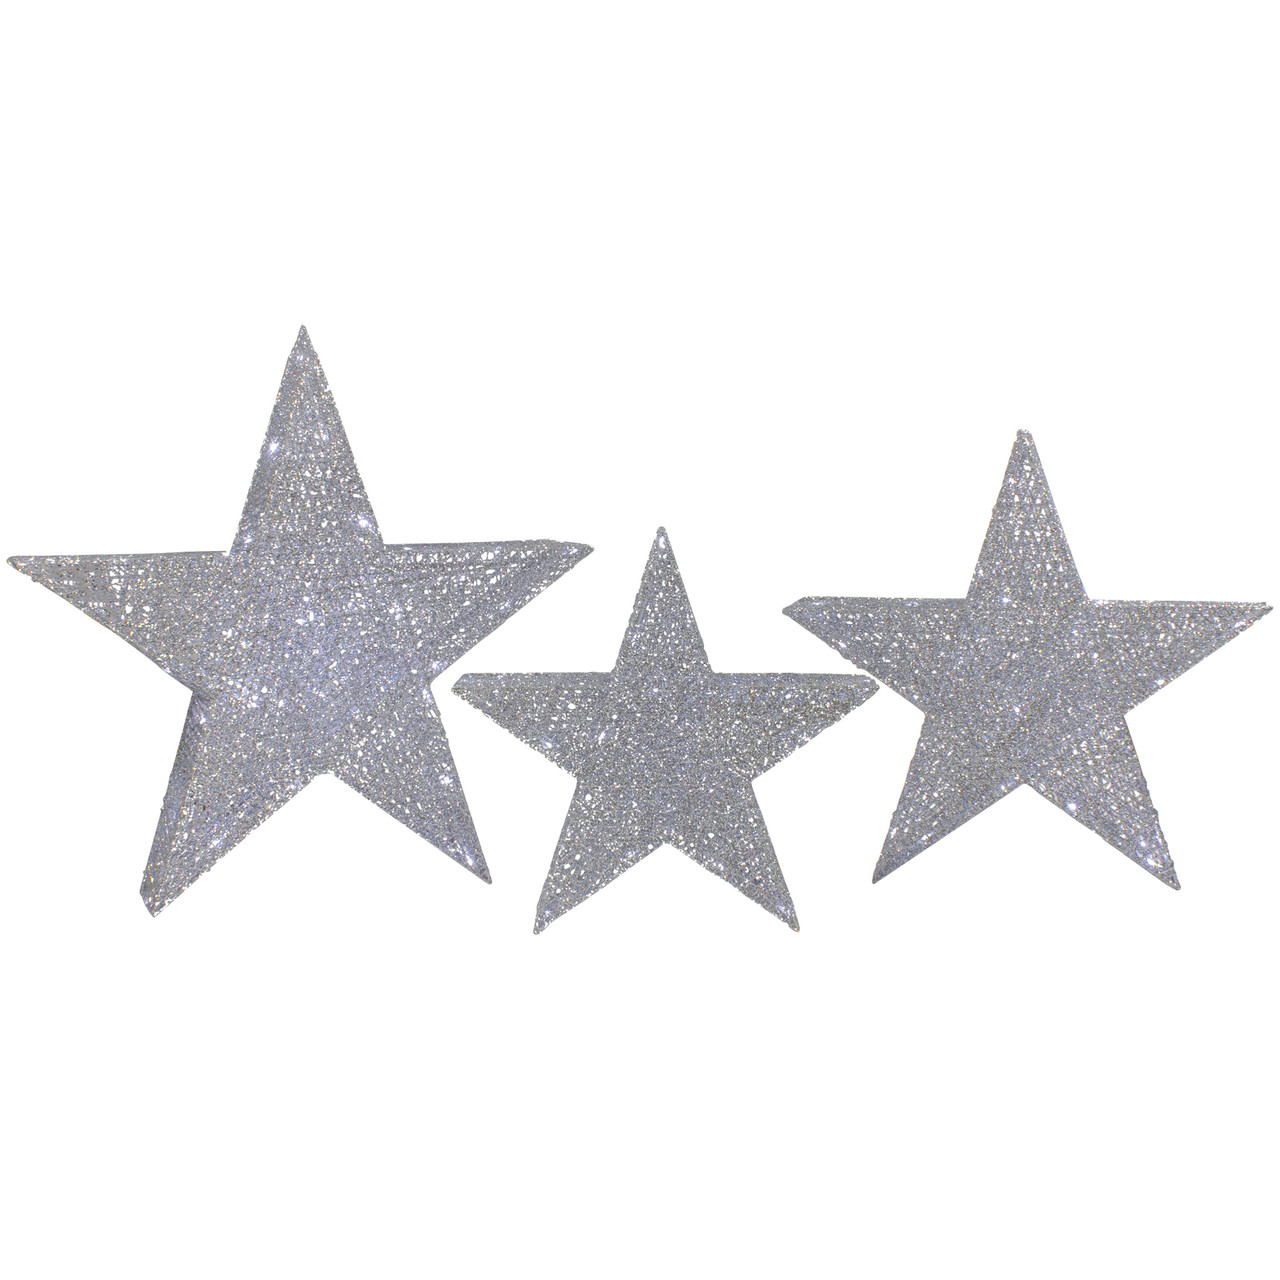 Set of 3 LED Lighted Silver Stars Outdoor Christmas Decorations 24 ...